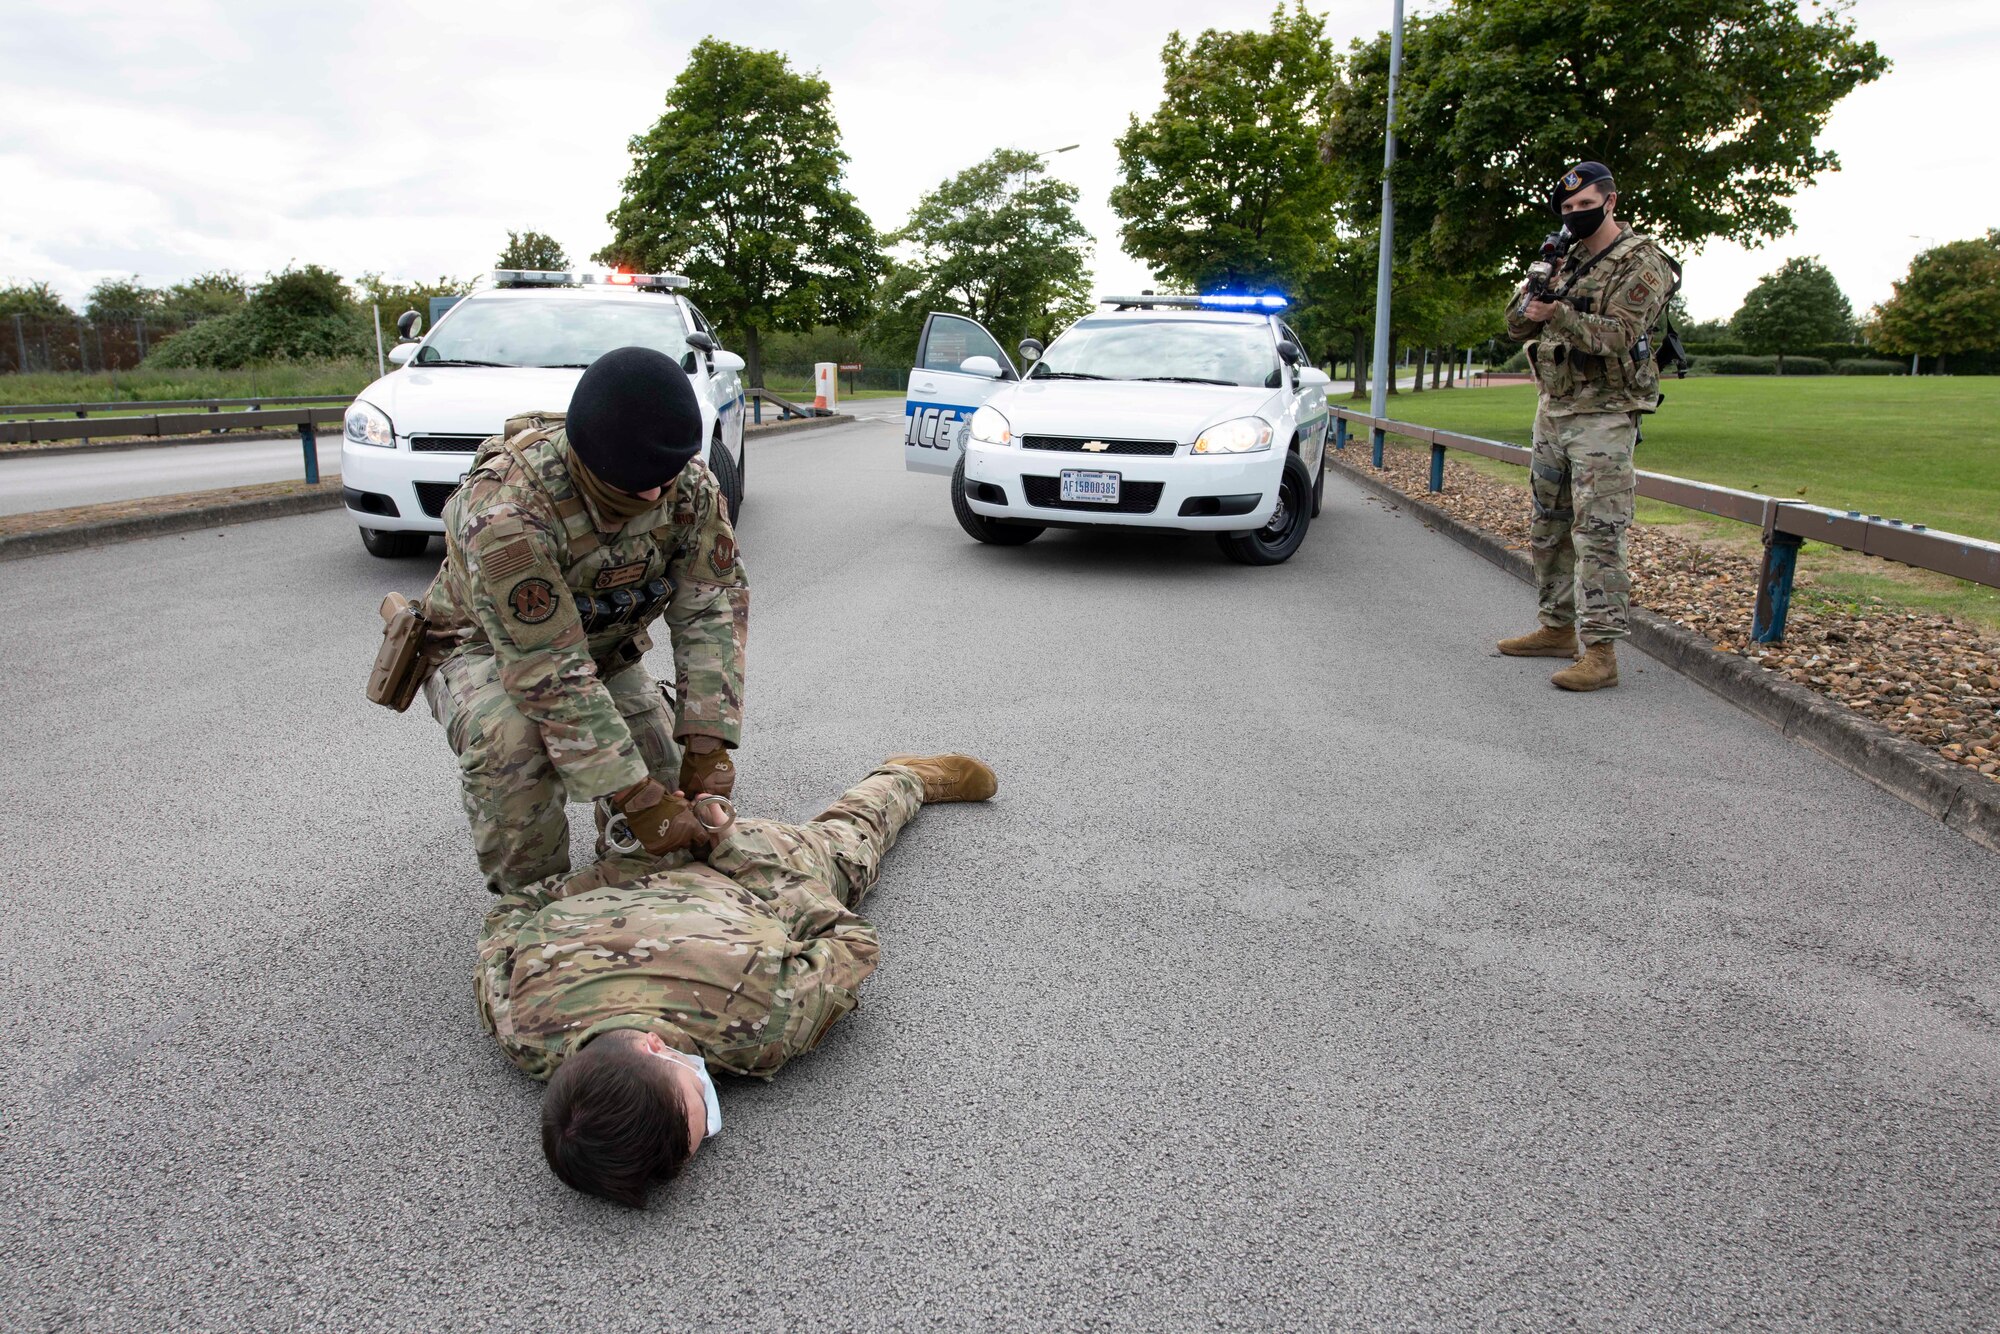 U.S. Air Force Senior Airman Josten Lacey and Staff Sgt. Derek Ricks, 423rd Security Forces Squadron (SFS) patrolmen, demonstrates apprehension techniques during a simulated gate runner and high risk vehicle challenge training at RAF Molesworth, England, July 28, 2020. 423rd SFS defenders conduct regular training and exercises to ensure mission readiness. (U.S. Air Force photo by Airman 1st Class Jennifer Zima)